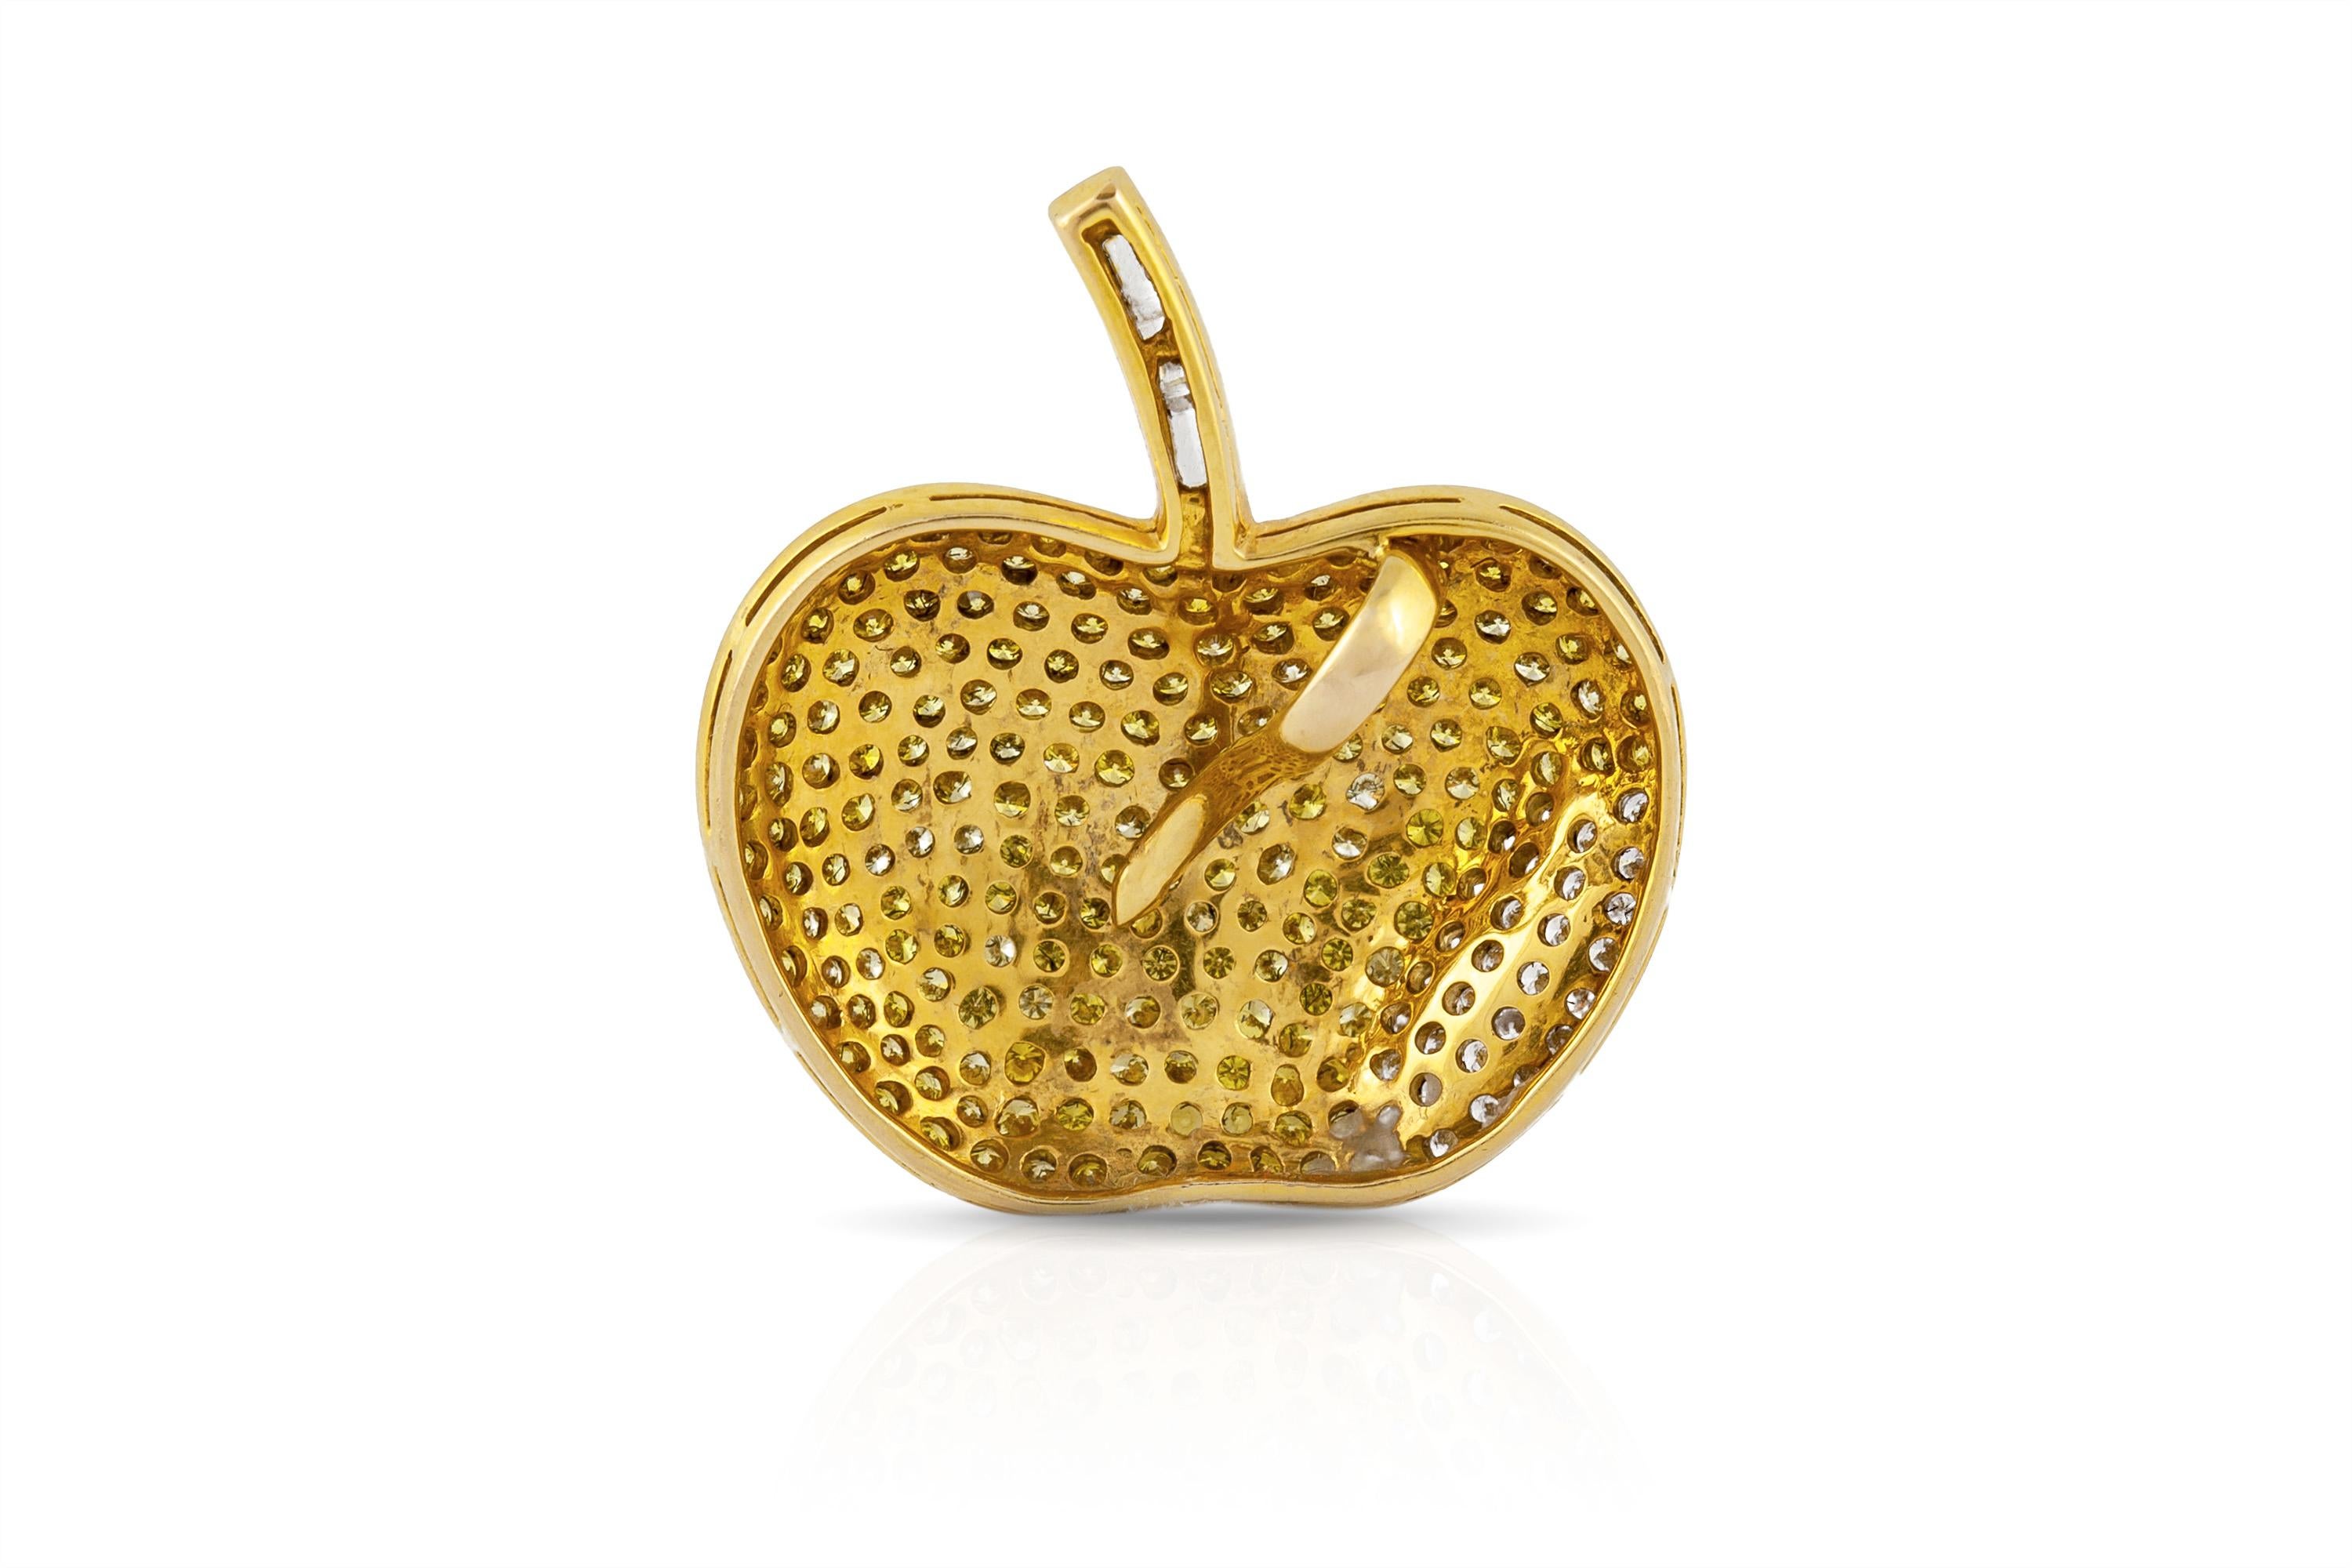 The pendant if finely crafted in 18k yellow gold with yellow diamonds and diamonds weighing approximately total of 1.55 carat.
Circa 2000.